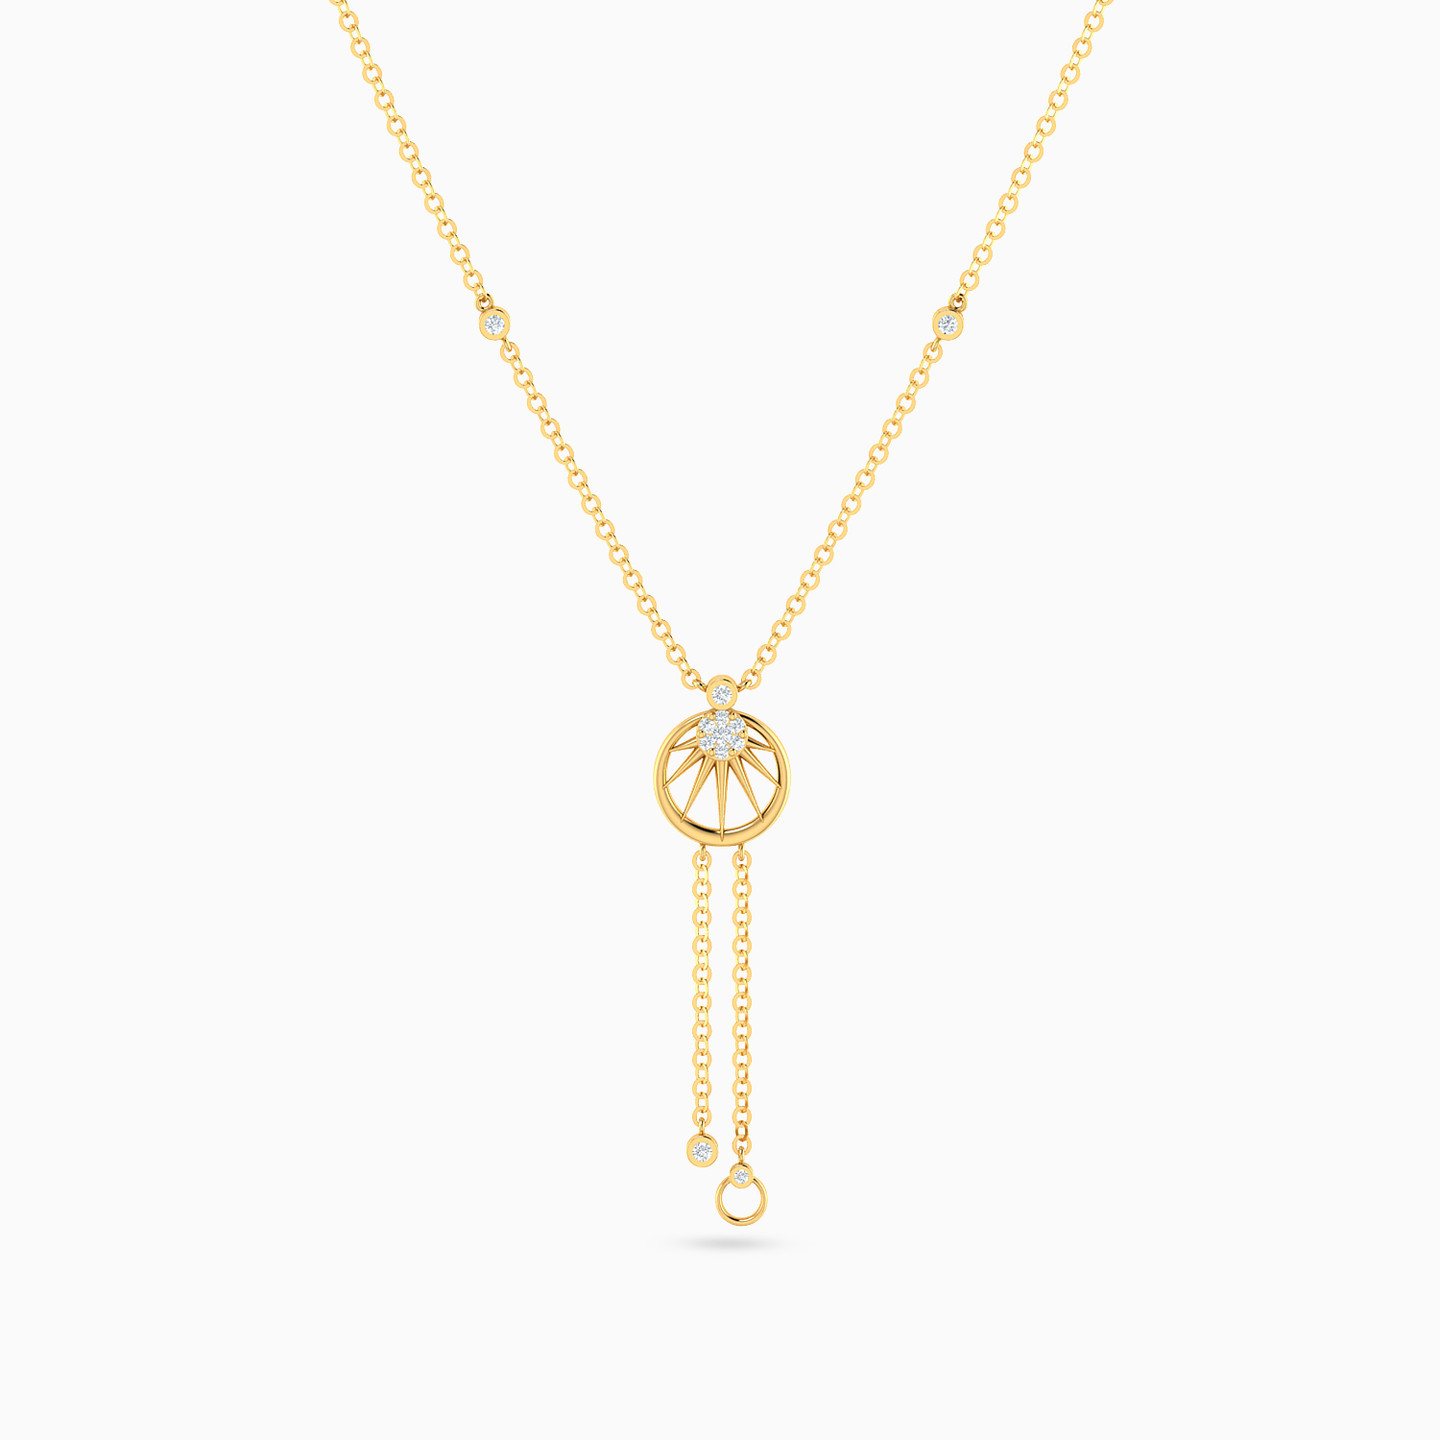 Round Shaped Diamond Pendant Necklace with 18K Gold Chain - 3